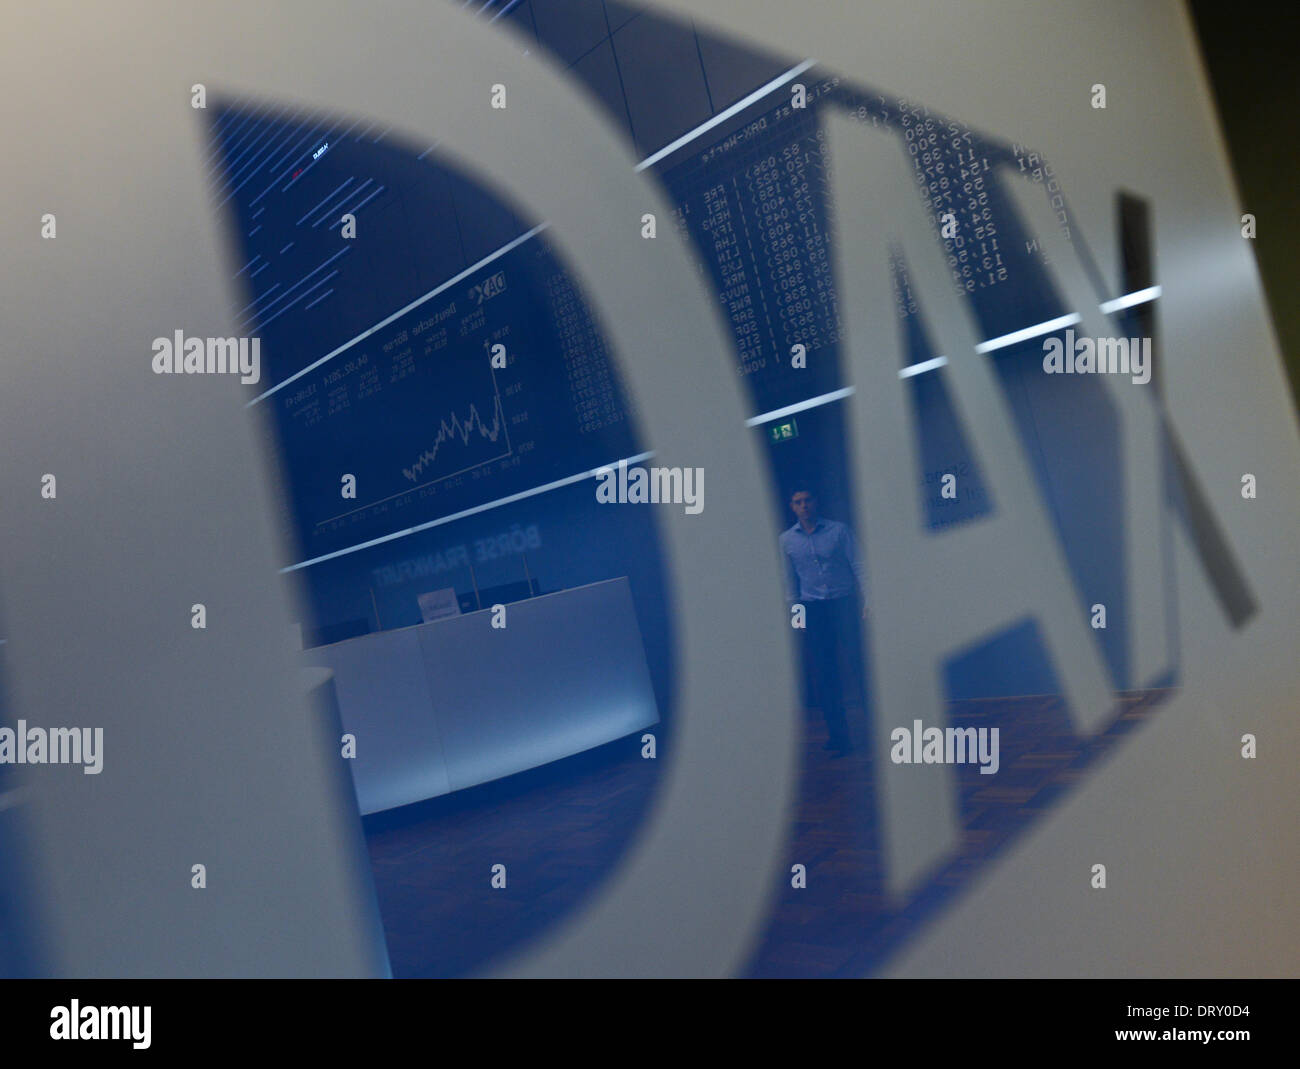 Frankfurt Main, Germany. 04th Feb, 2014. The hall of the stock market is reflected in the Dax logo at the stock market in Frankfurt Main, Germany, 04 February 2014. Germany's Dax index dropped after a sharp fall in prices in Asia. Photo: Arne Dedert/dpa/Alamy Live News Stock Photo